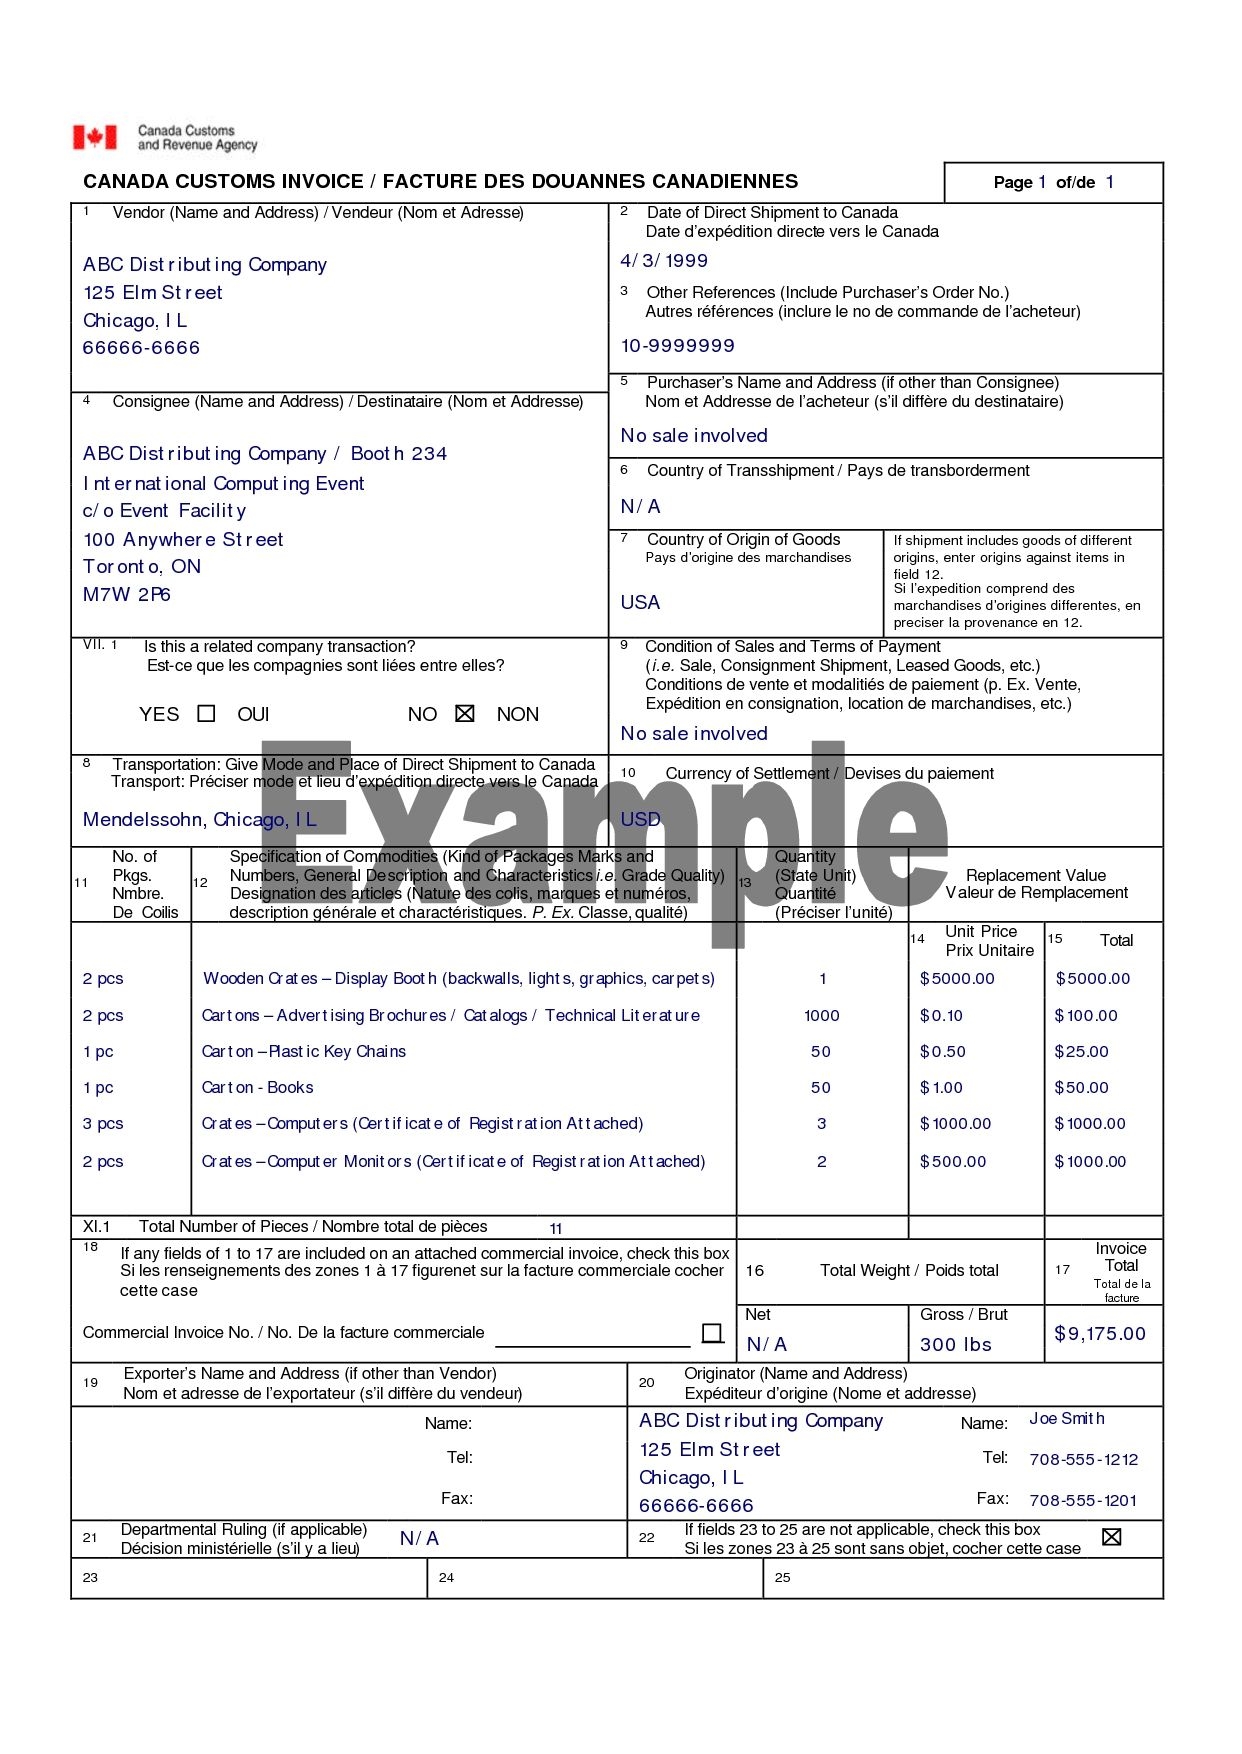 canada customs invoice canada customs invoice template canadian customs invoice example